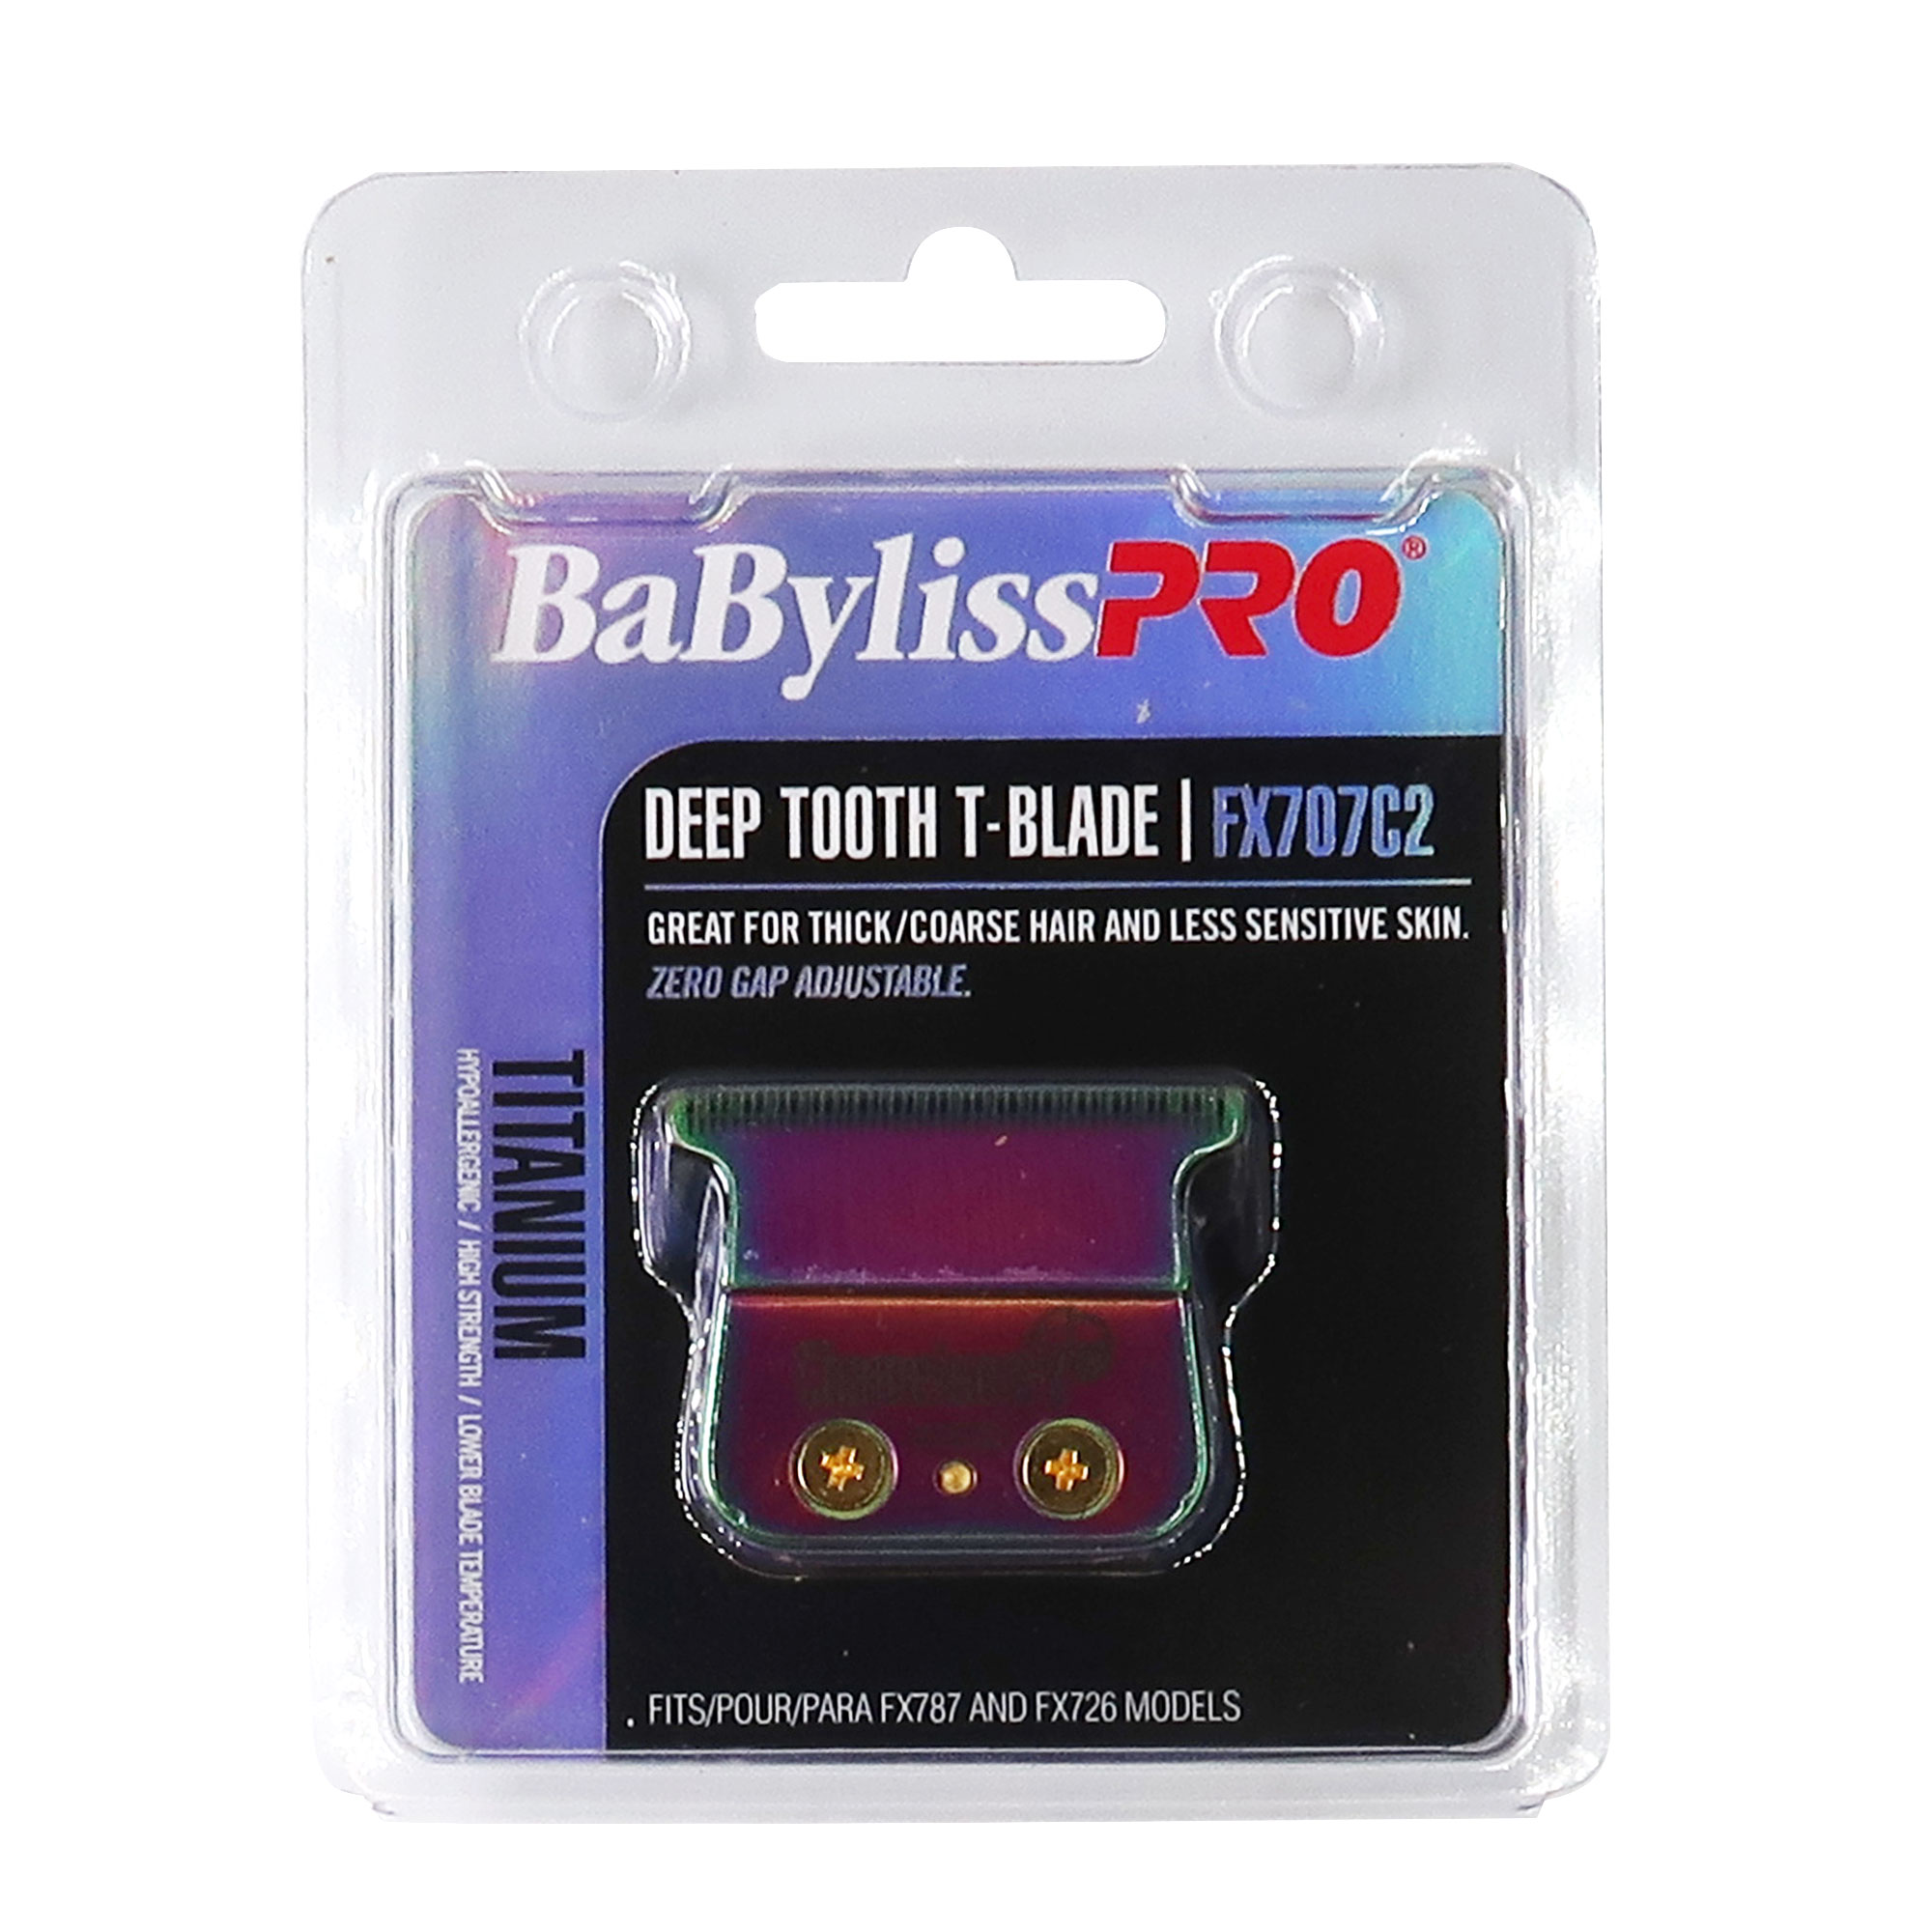 BaByliss Pro Replacement Titanium Deep Tooth T-Blade #FX707C2 - 10 Count